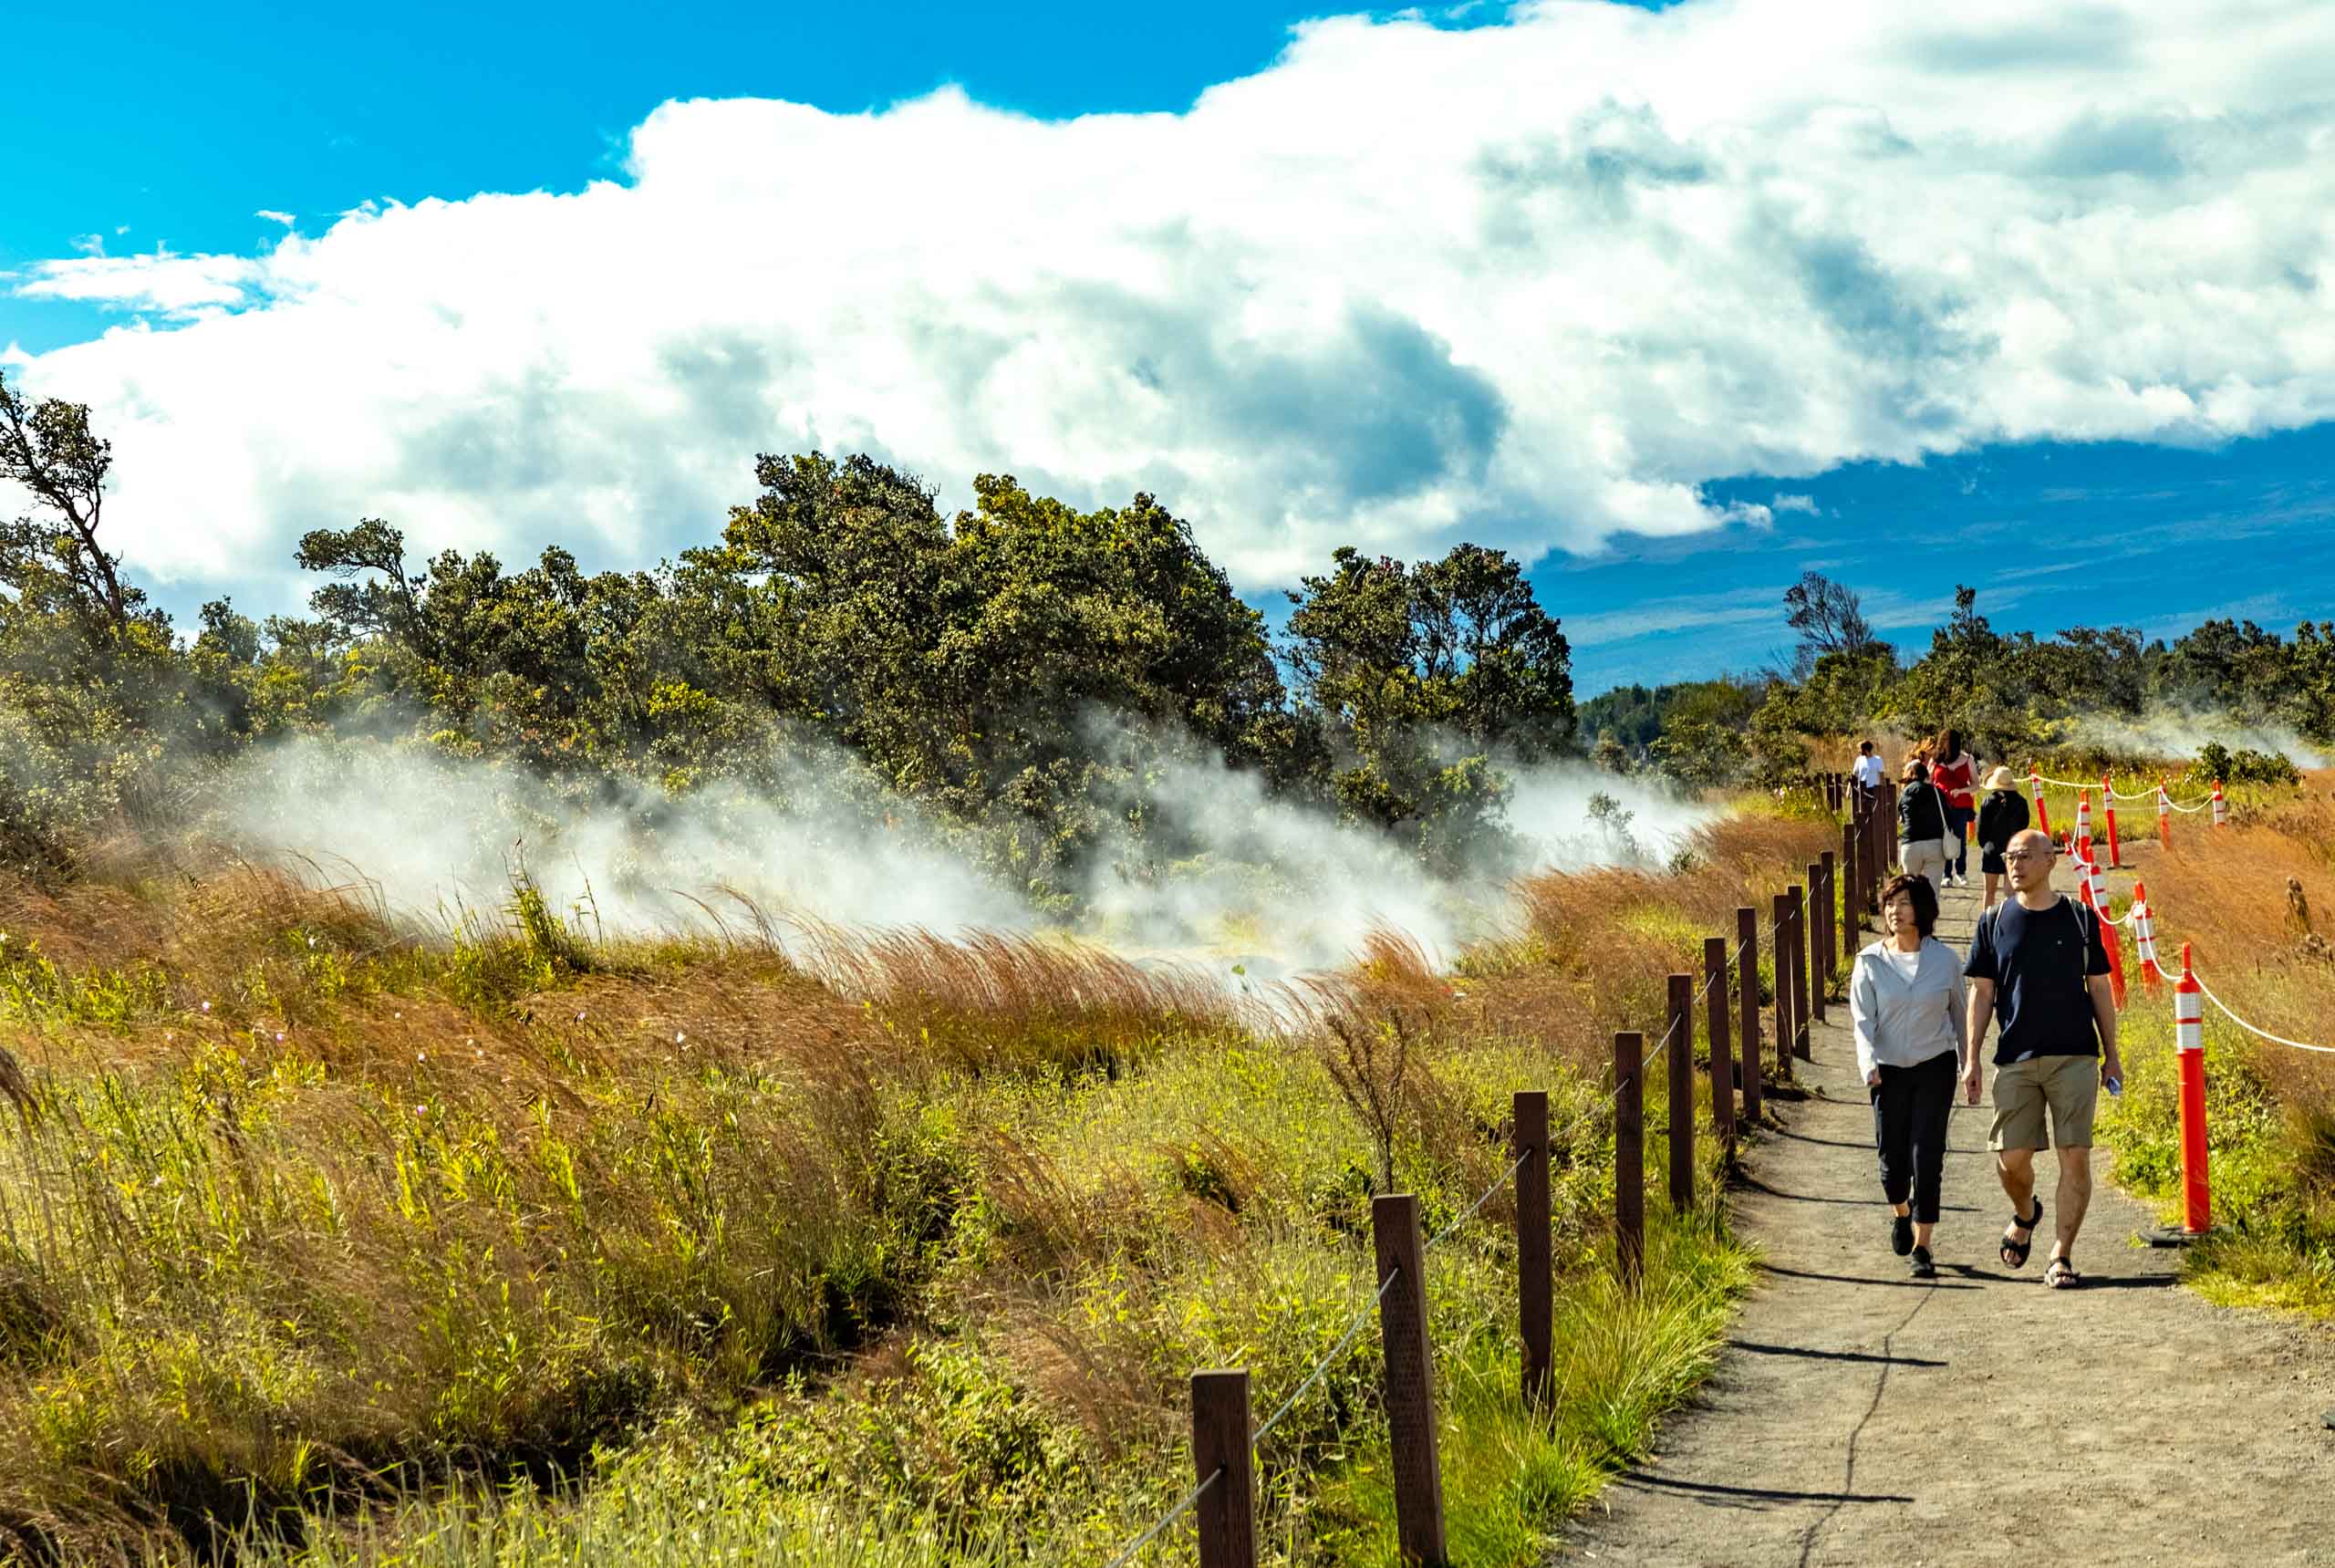 Visitors along Steam Vents Trail in Volcanoes National Park Big Island Hawaii